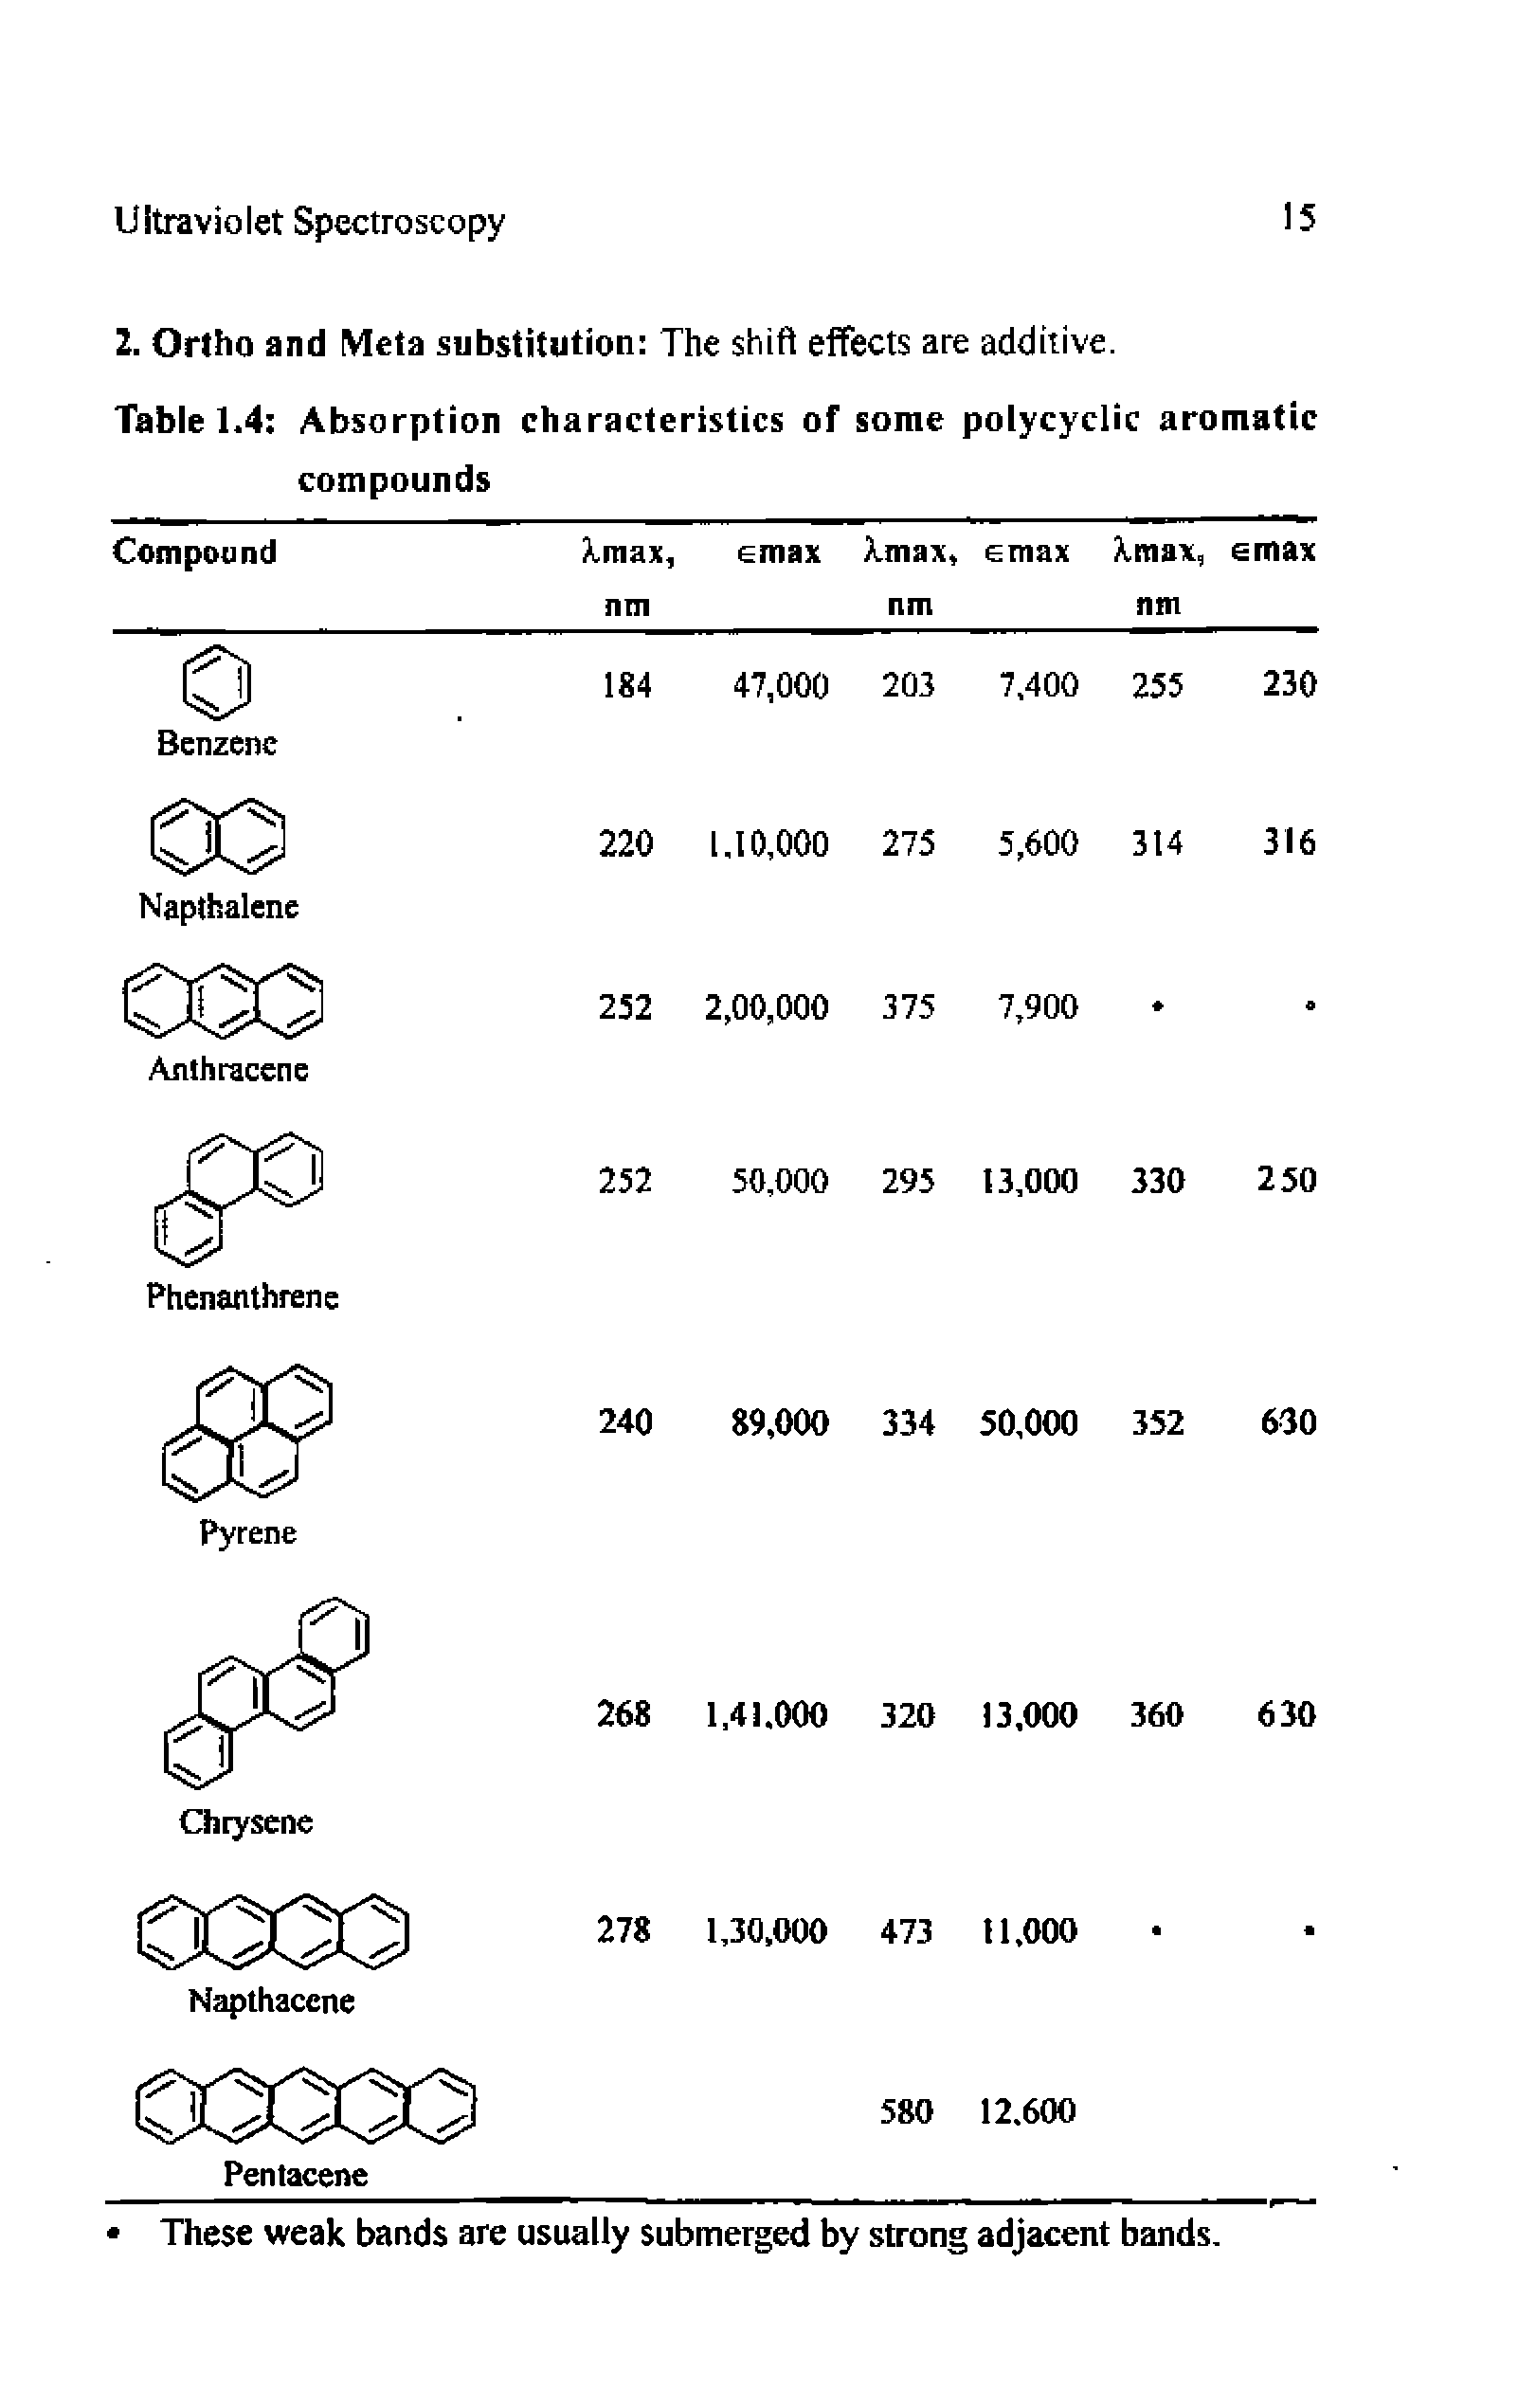 Table 1.4 Absorption characteristics of some polycyclic aromatic compounds...